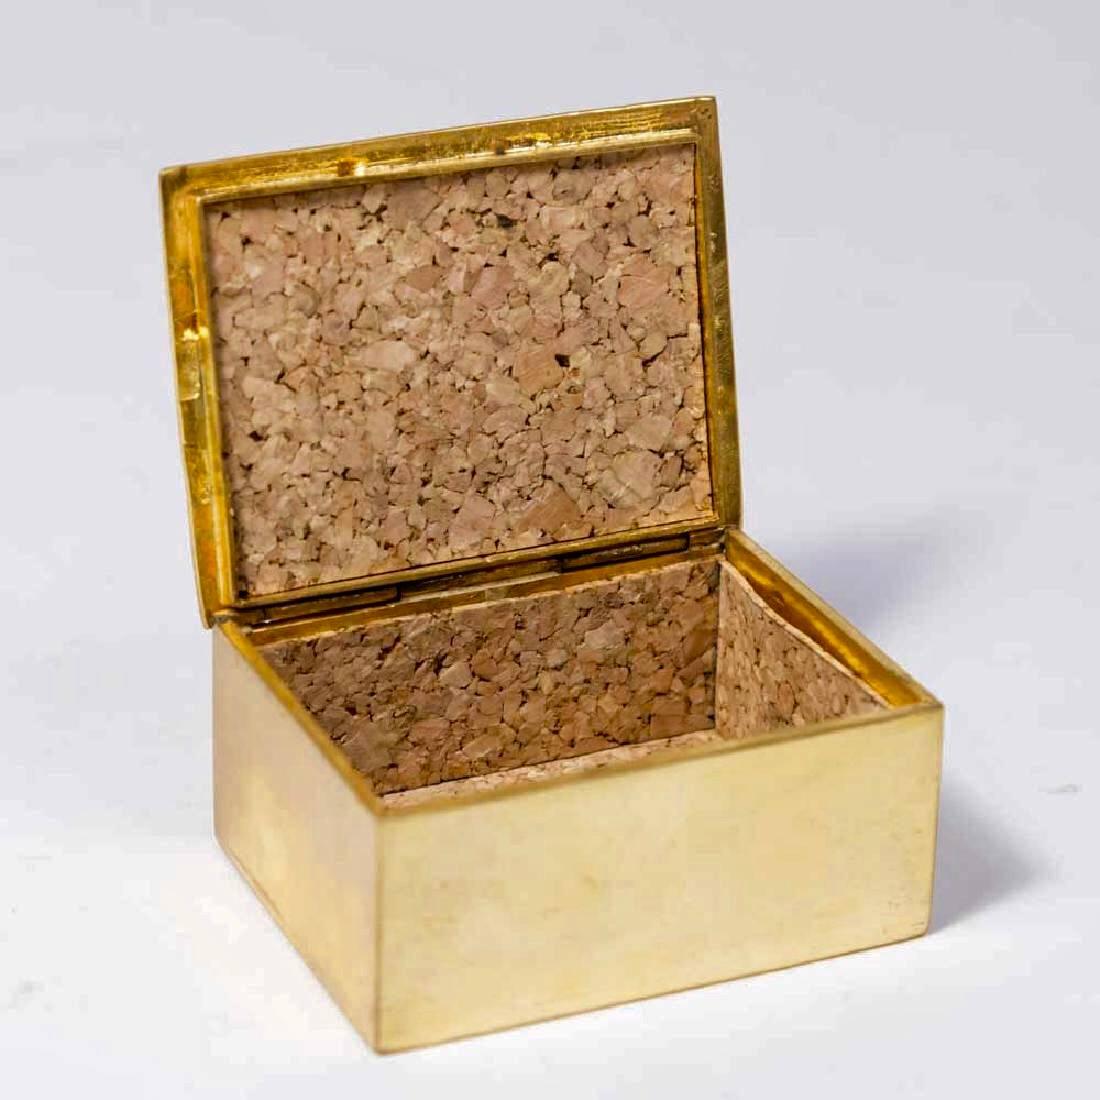 A rare bronze doré compact box called "Saint-on Jamais ou Mene l'Amour" by Line Vautrin, circa 1950.
With cork lining. Monogrammed.
For a similar piece, see Christie's Paris auction May 20th, 2015 lot 319.